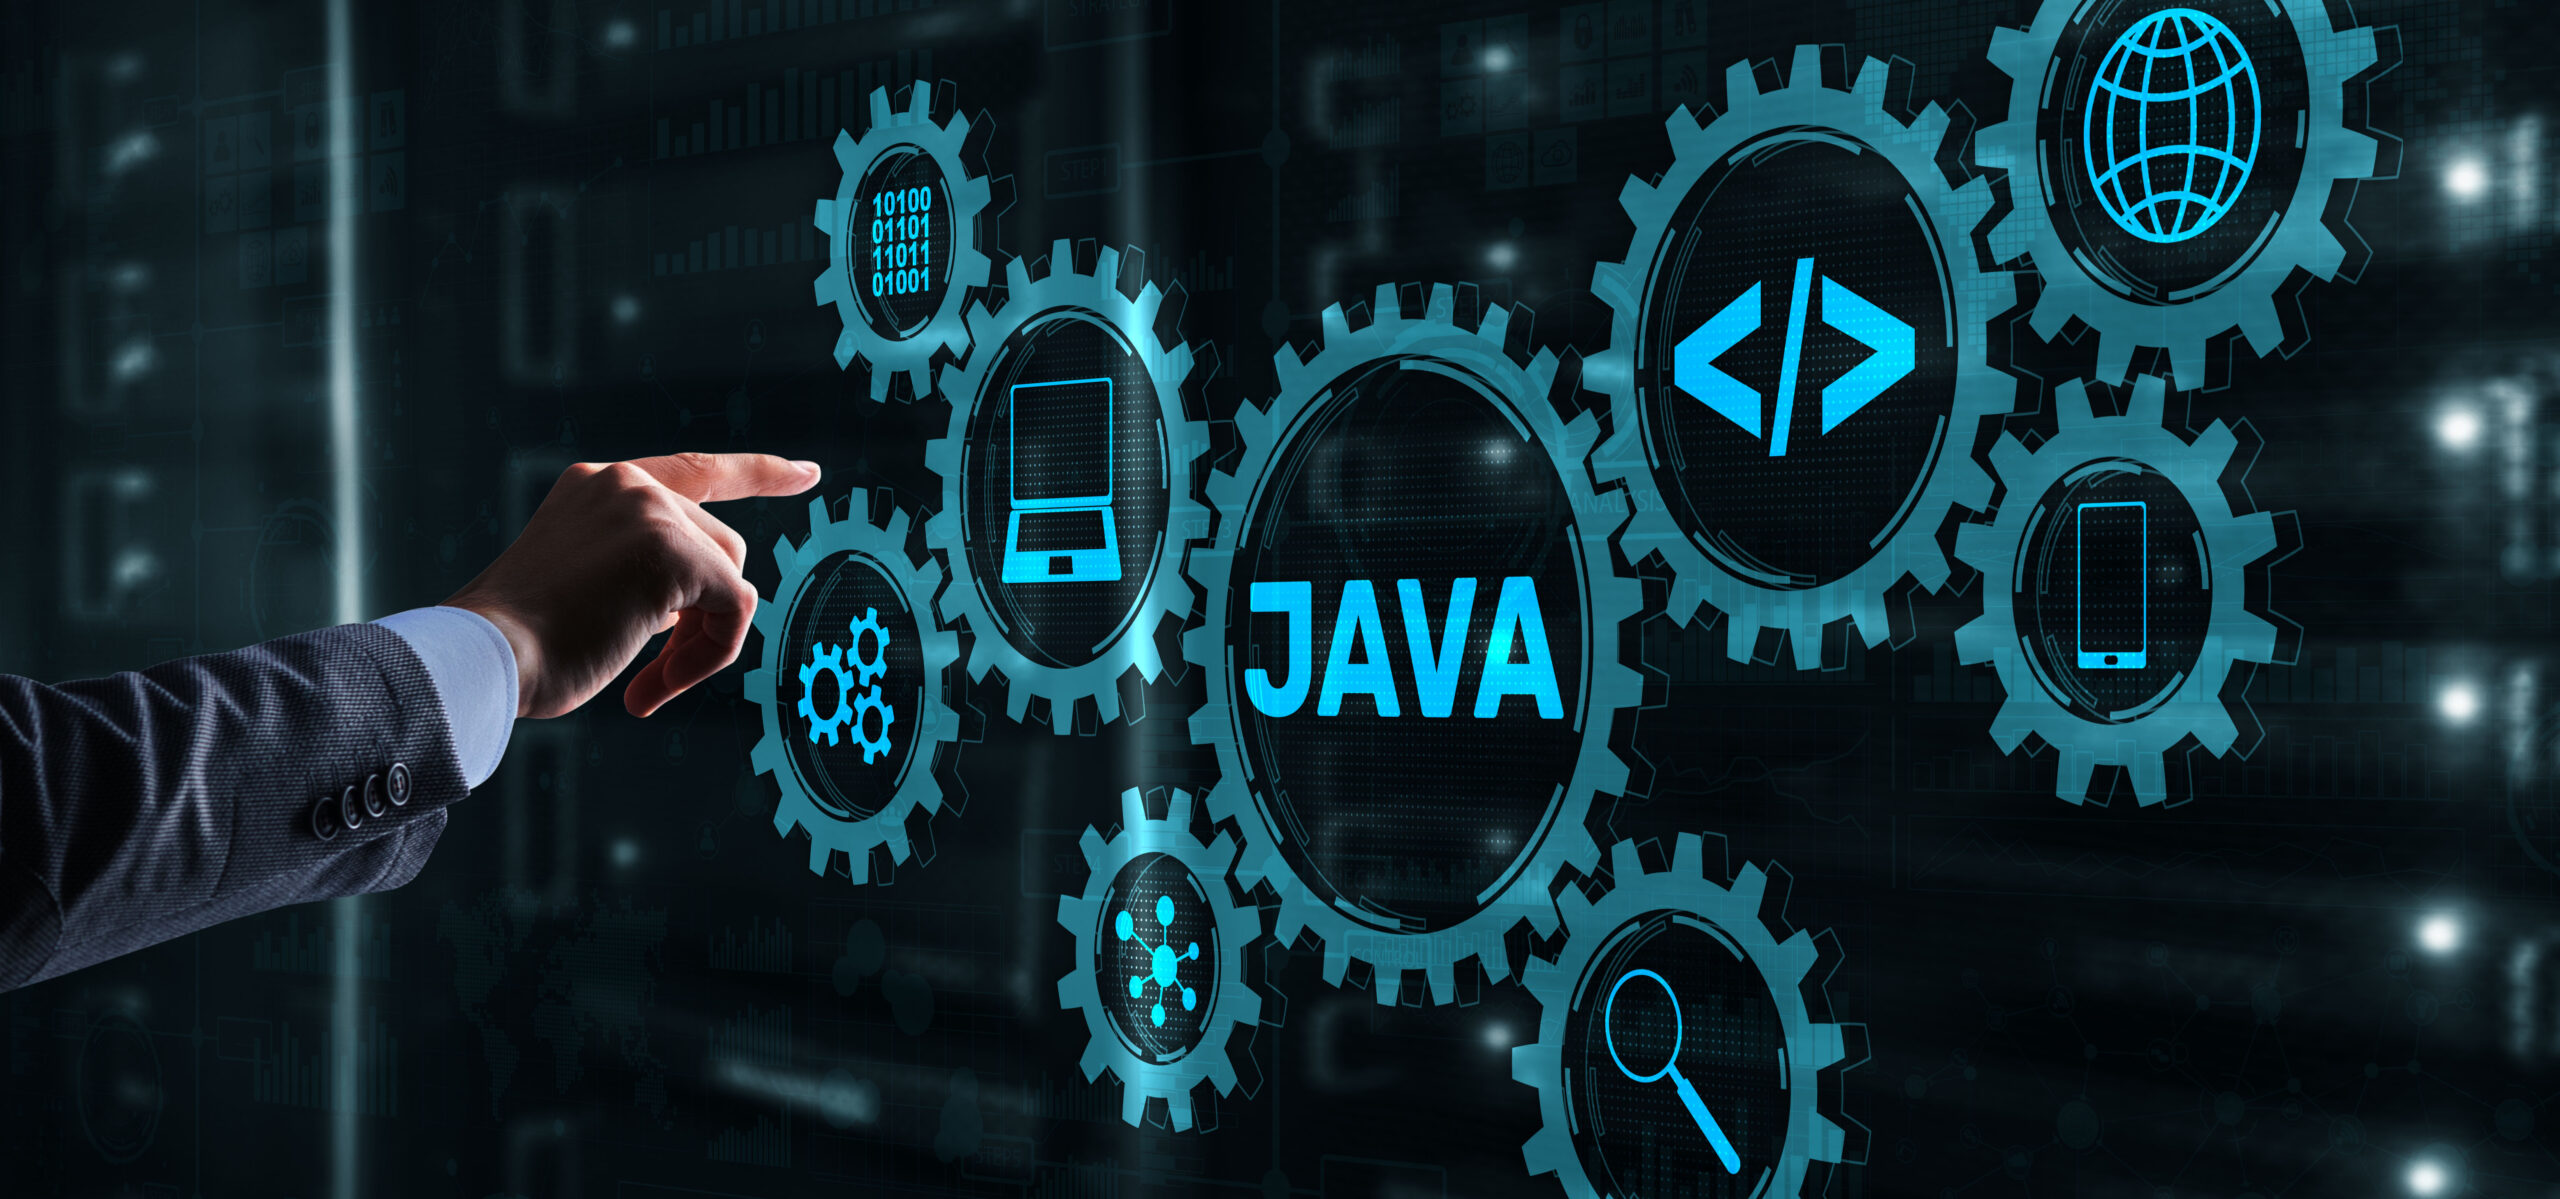 The Future of Java: 8 Top Trends and Technologies For Java Developers You Need to Know